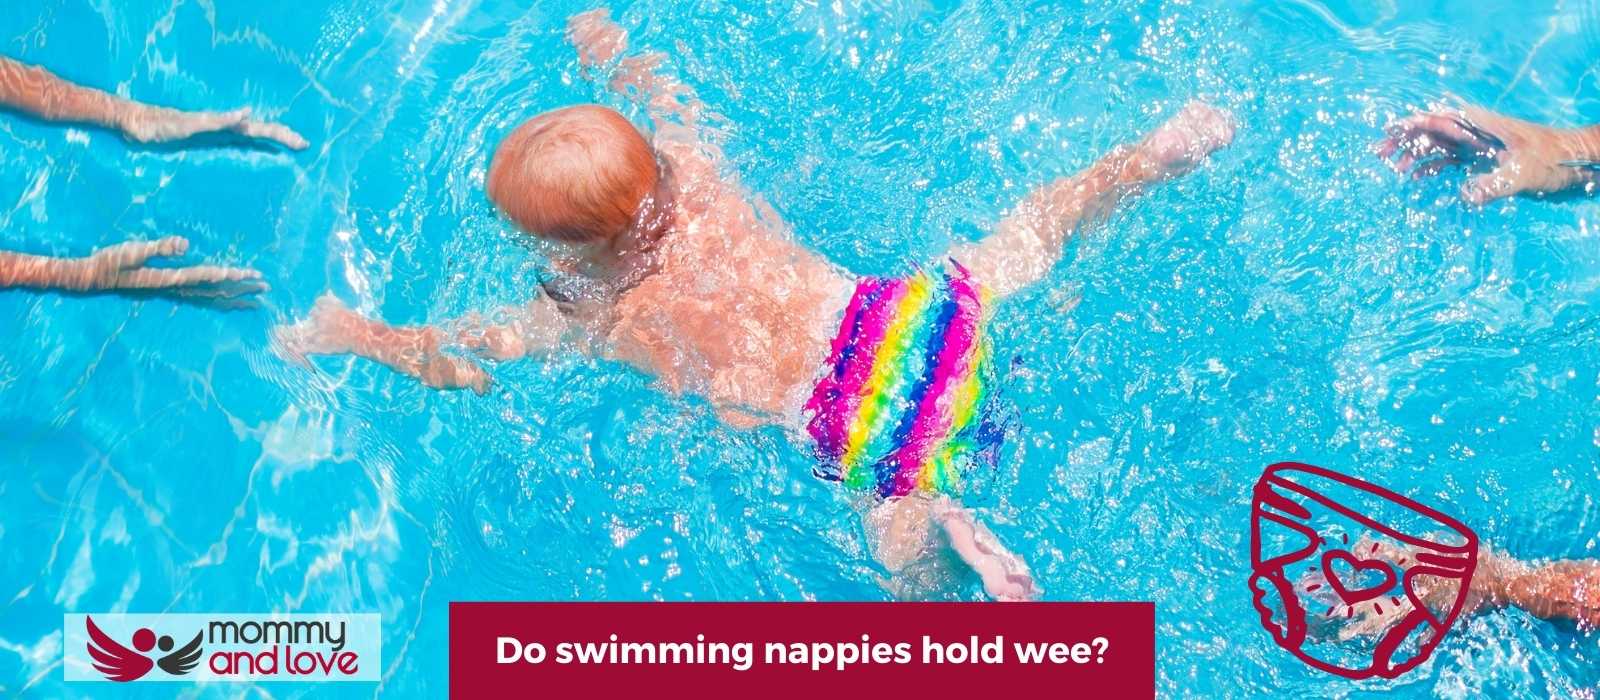 Do swimming nappies hold wee?